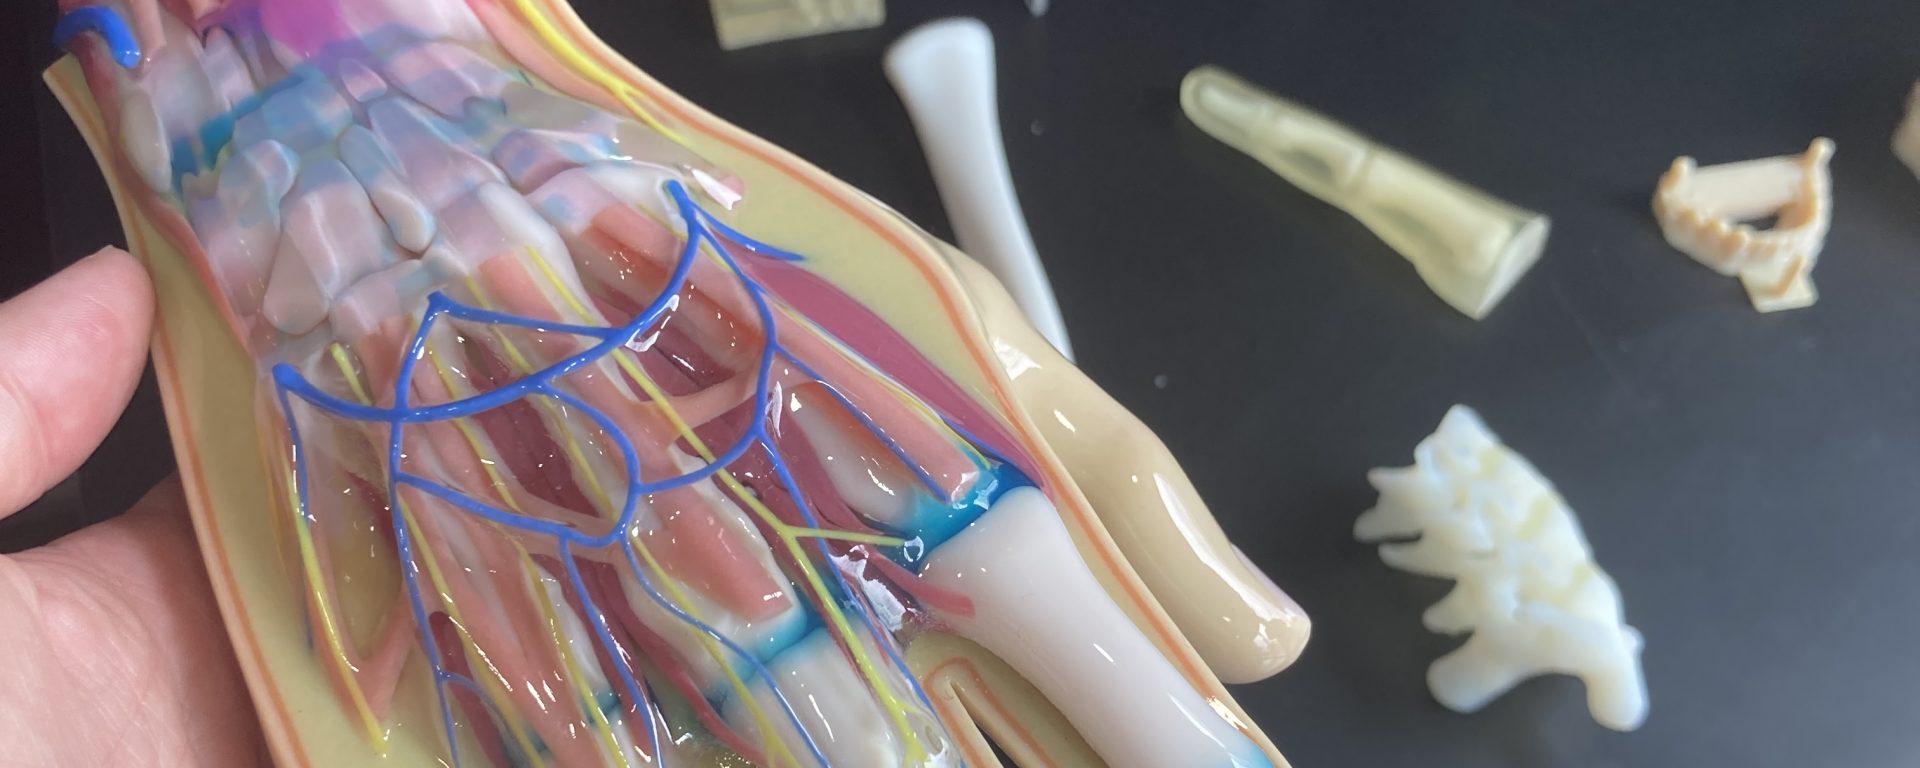 3D printed hand showing internal bones and tissues.